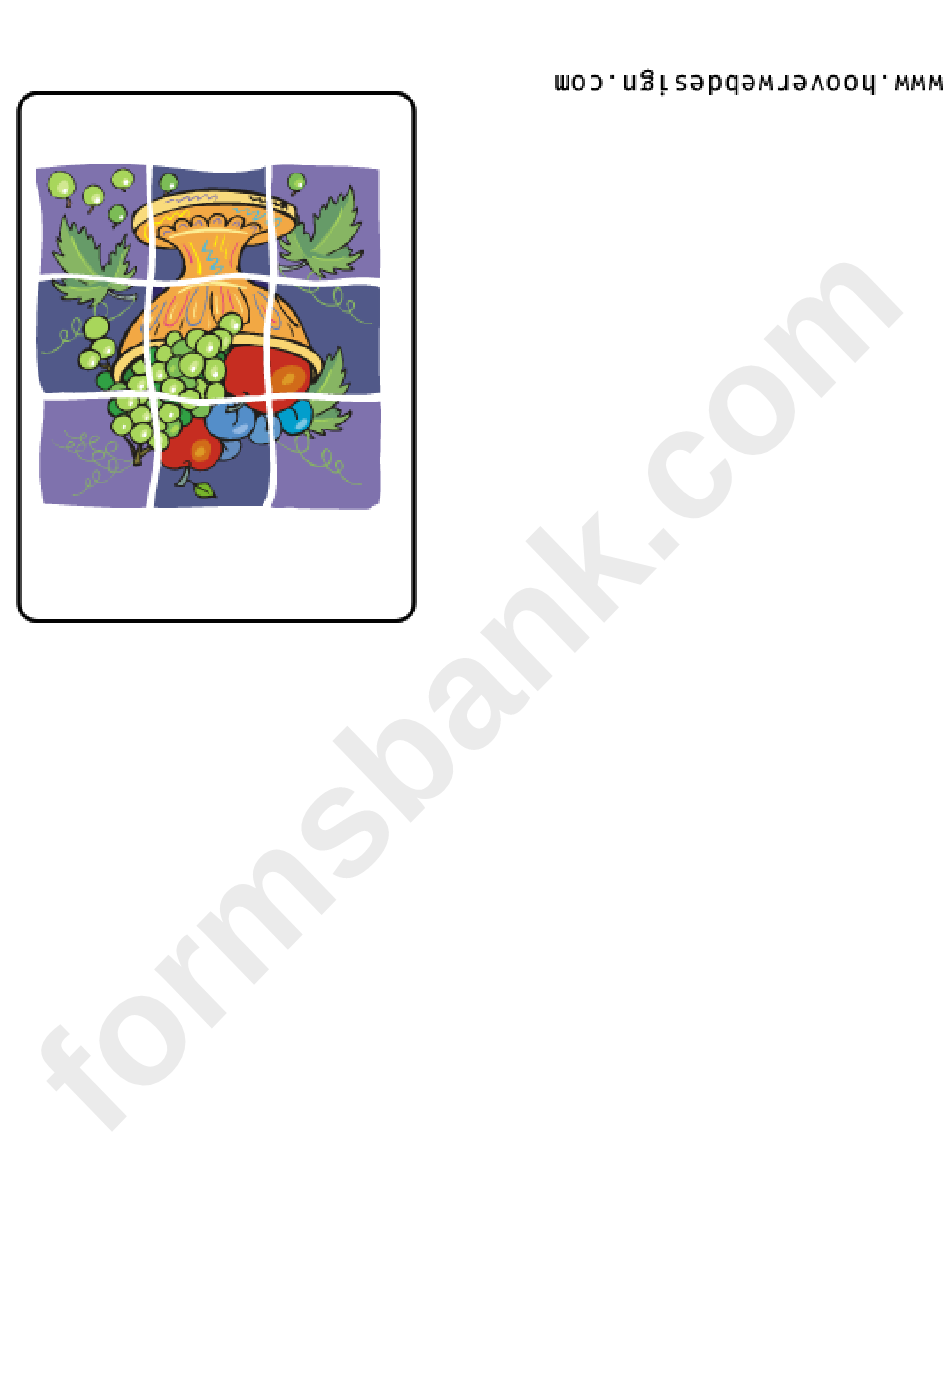 Fruit Picture - Greeting Card Template